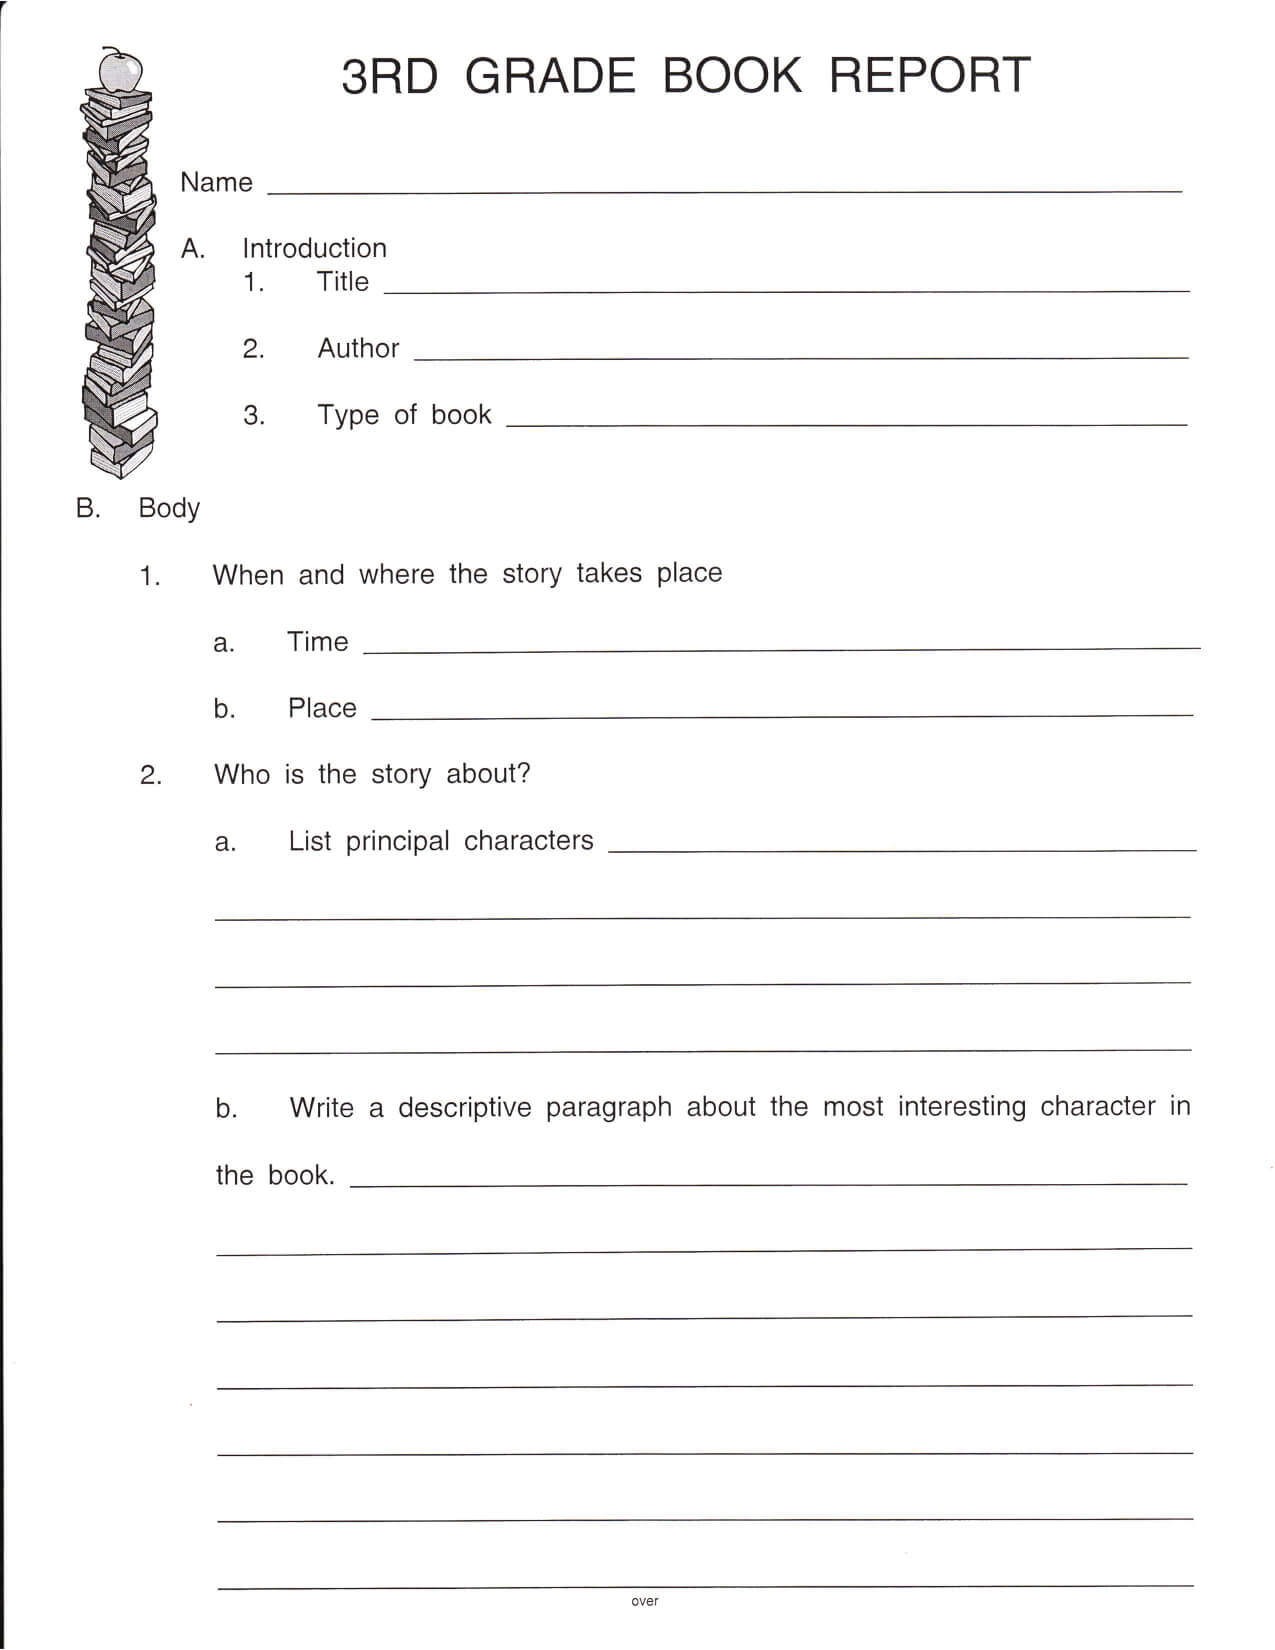 Pinshelena Schweitzer On Classroom Reading | Book Report Within 1St Grade Book Report Template